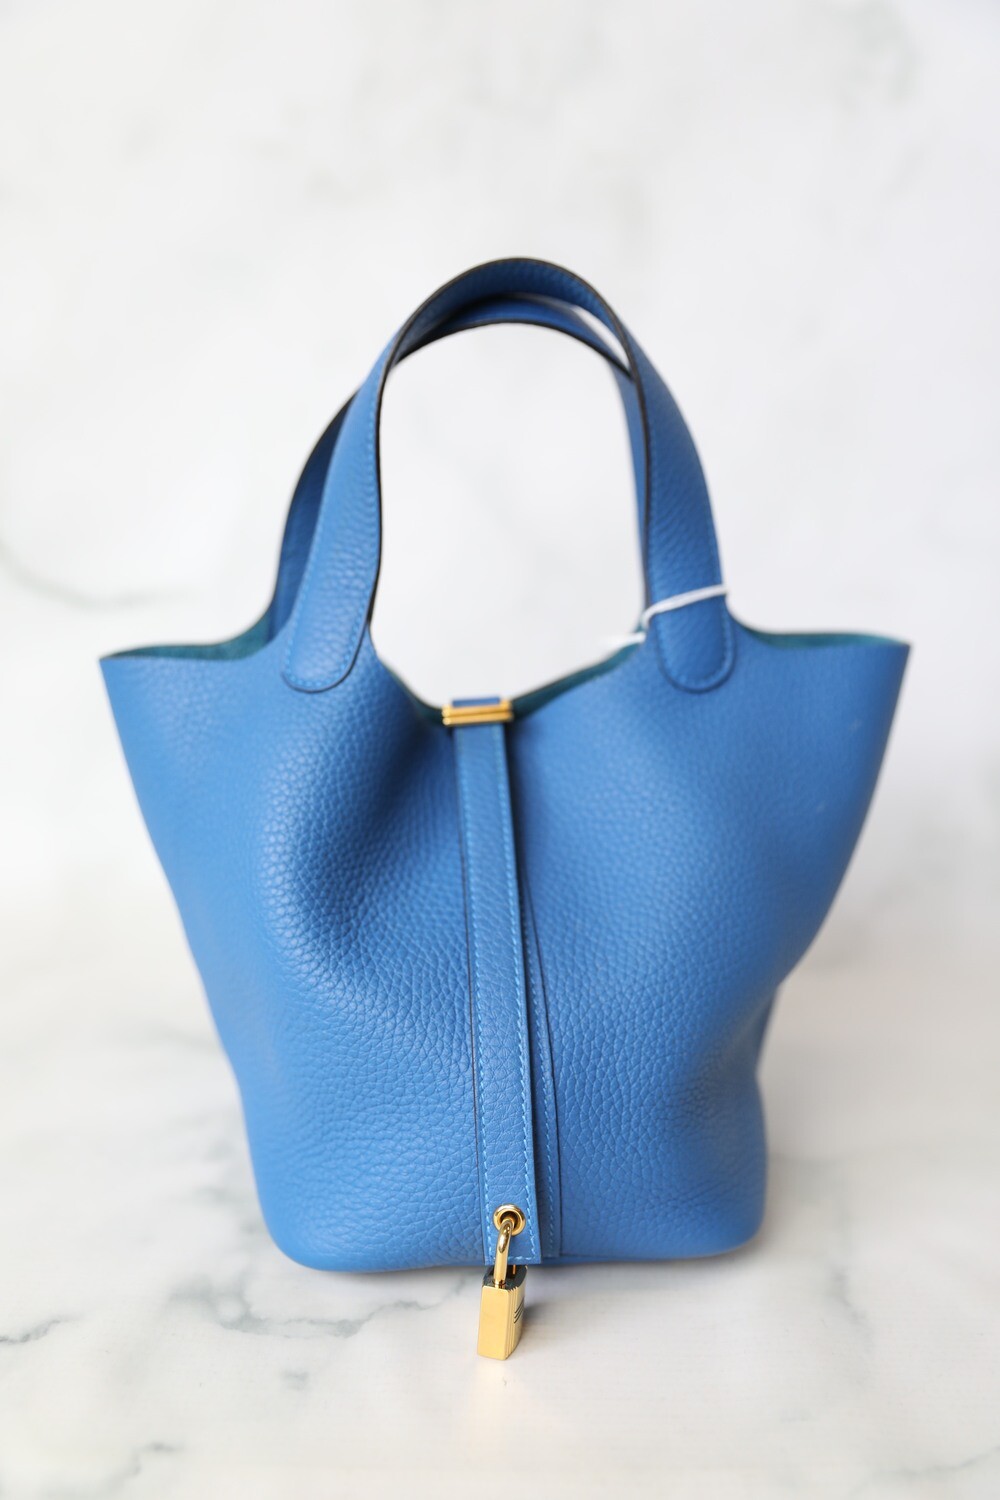 Hermes Picotin 18, Mykonos Blue Leather with Gold Hardware